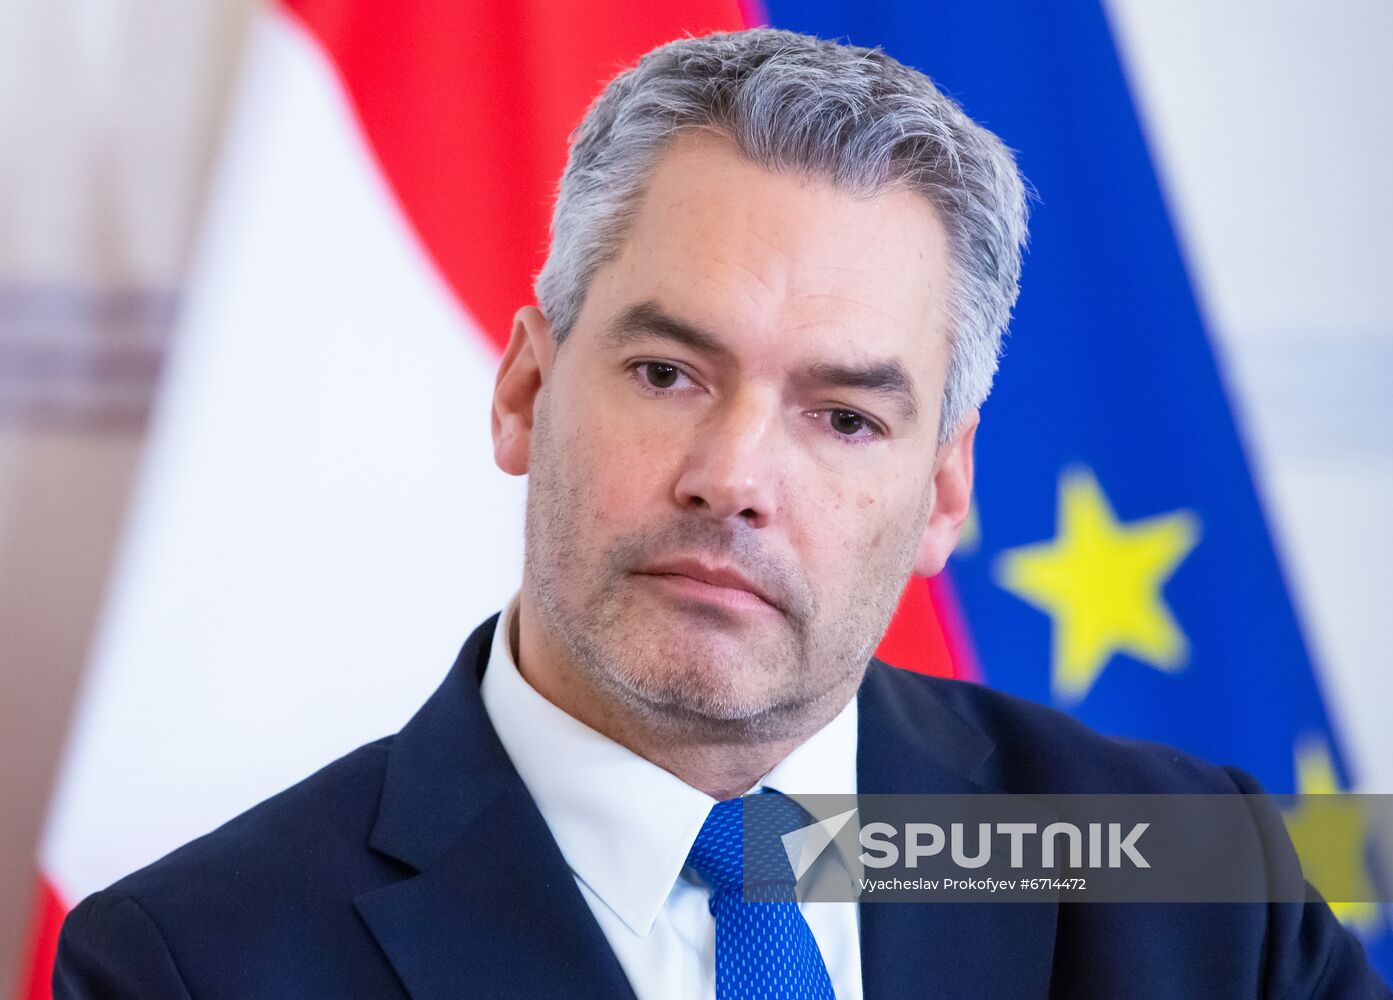 Austria New Chancellor Swearing-In